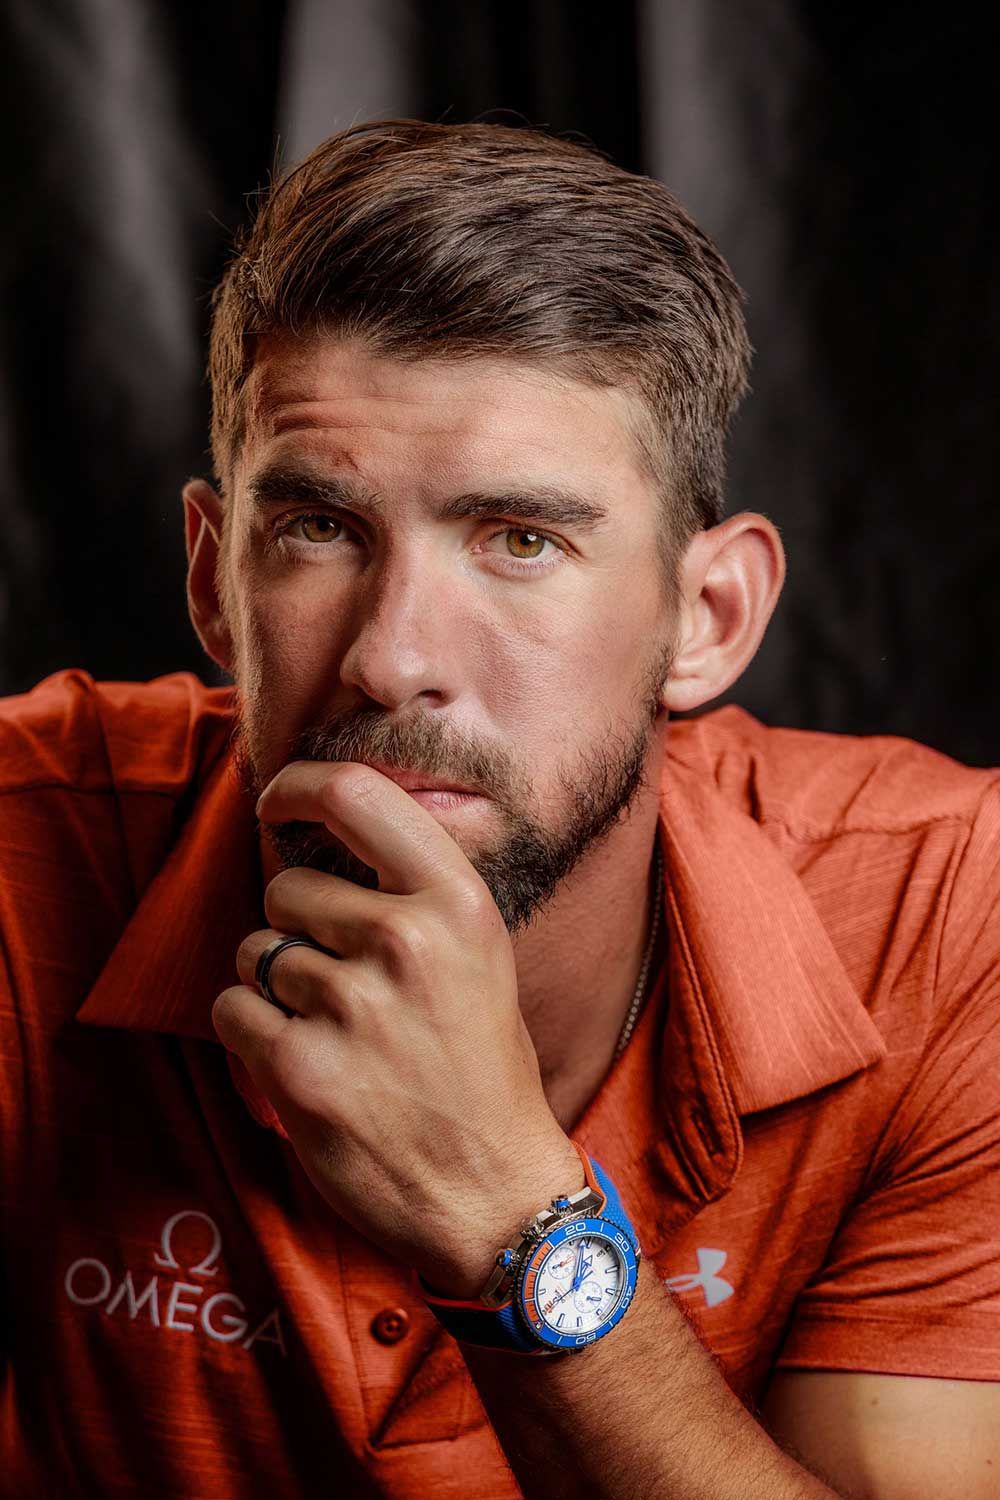 23-time gold medalist Michael Phelps